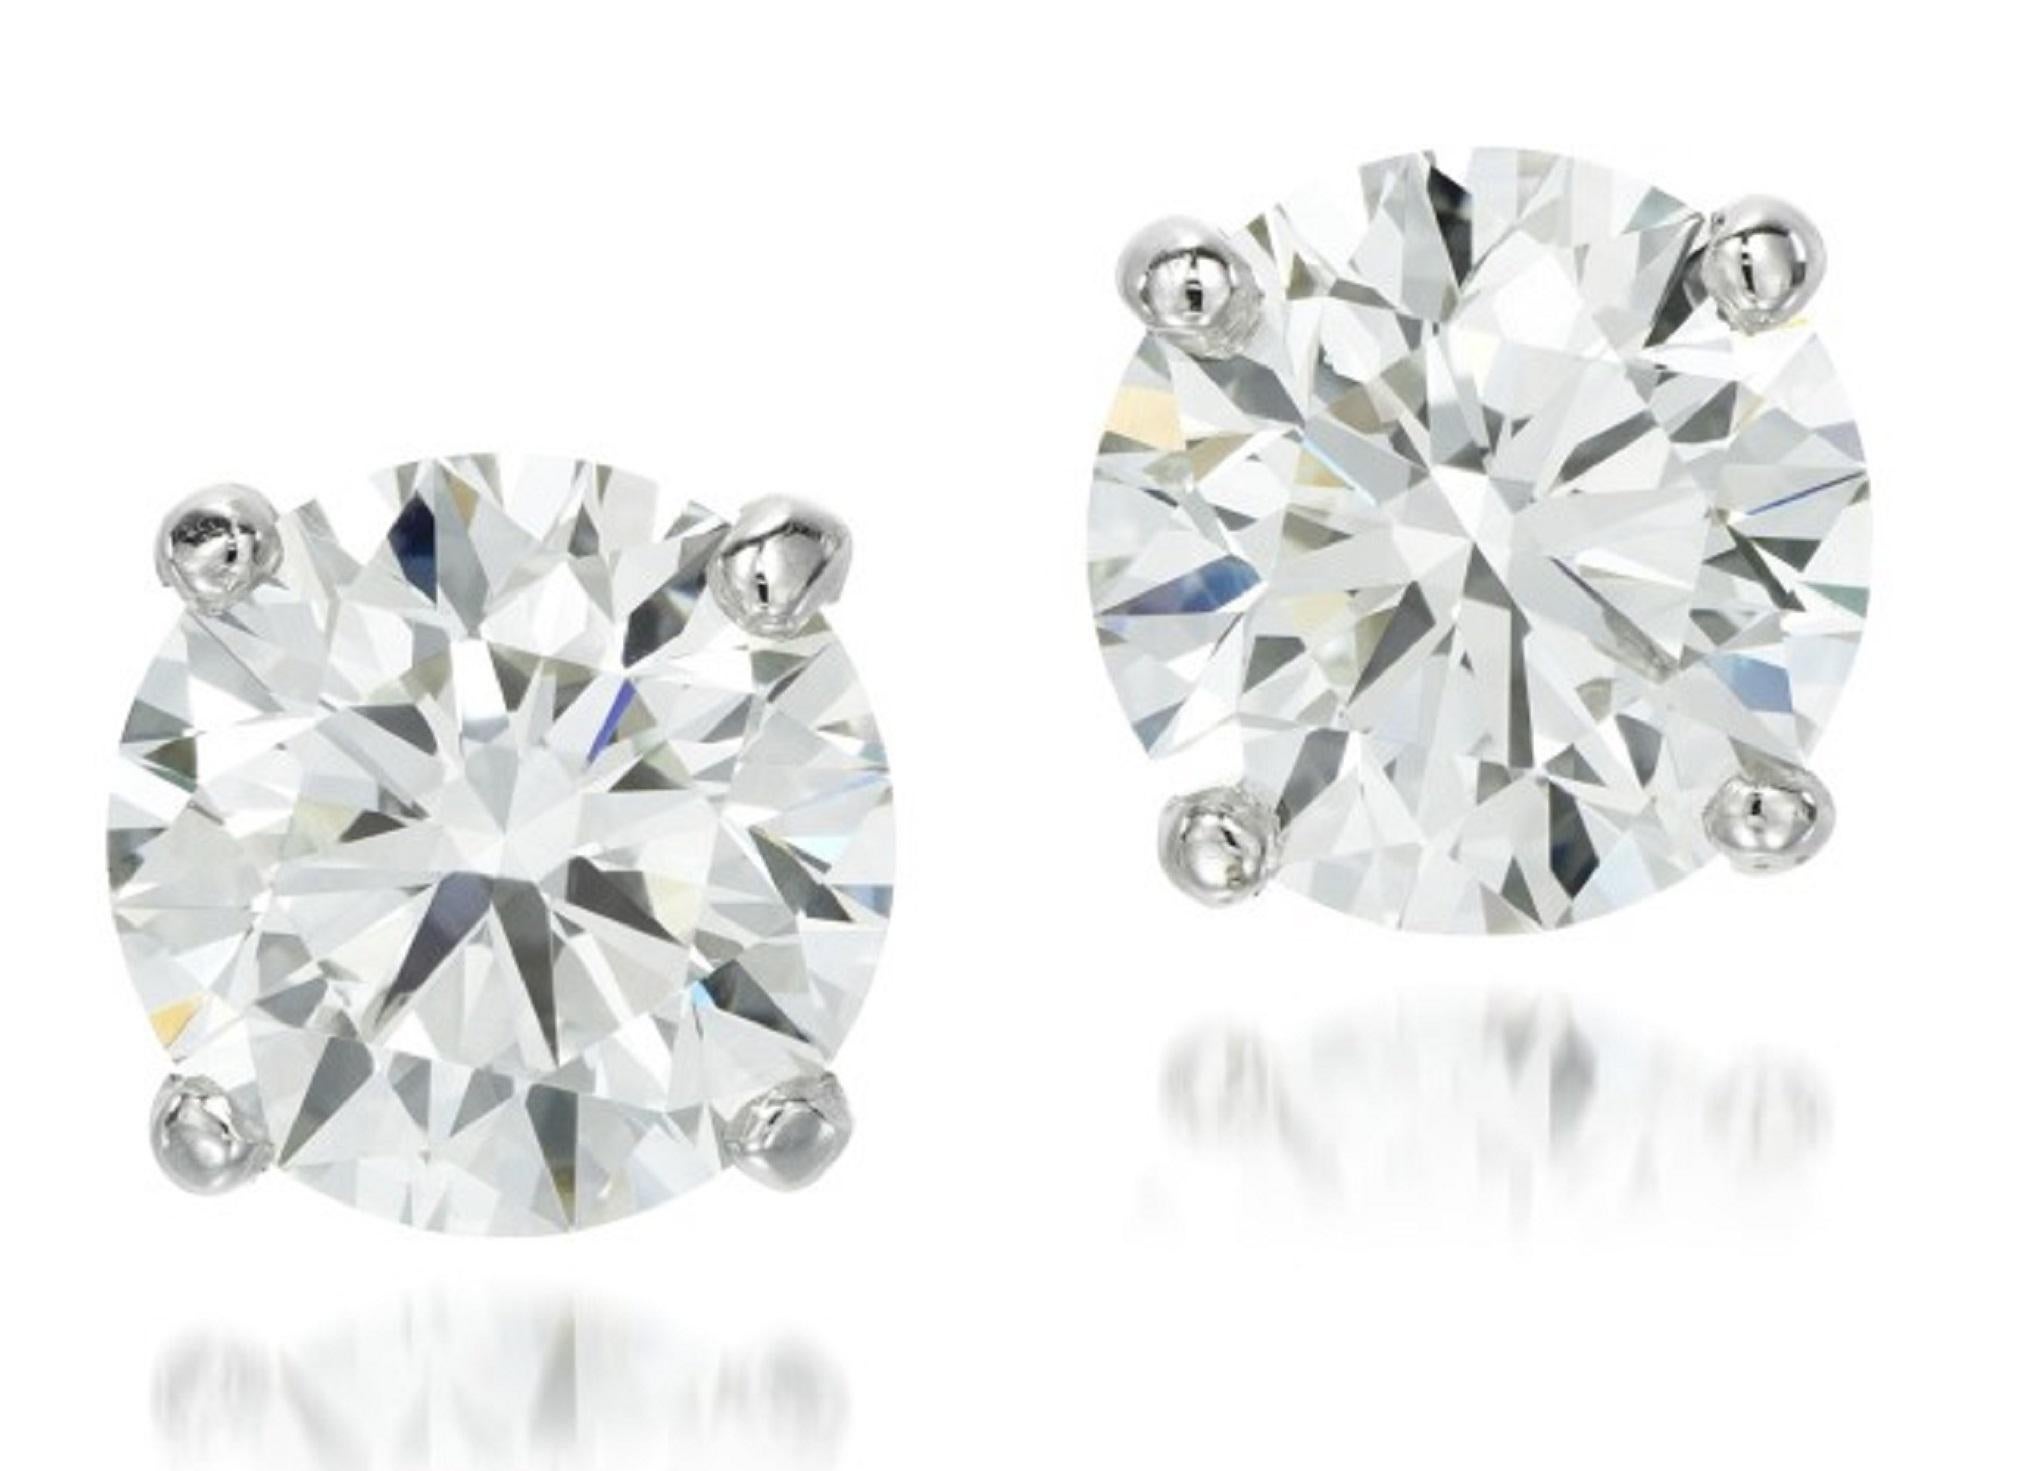 This striking GIA Certified 4 carat pair of round brilliant cut certified diamonds is bright white, eye clean, and dazzlingly brilliant! These diamonds were individually hand selected for their superior color, well hidden inclusions, and beautiful,